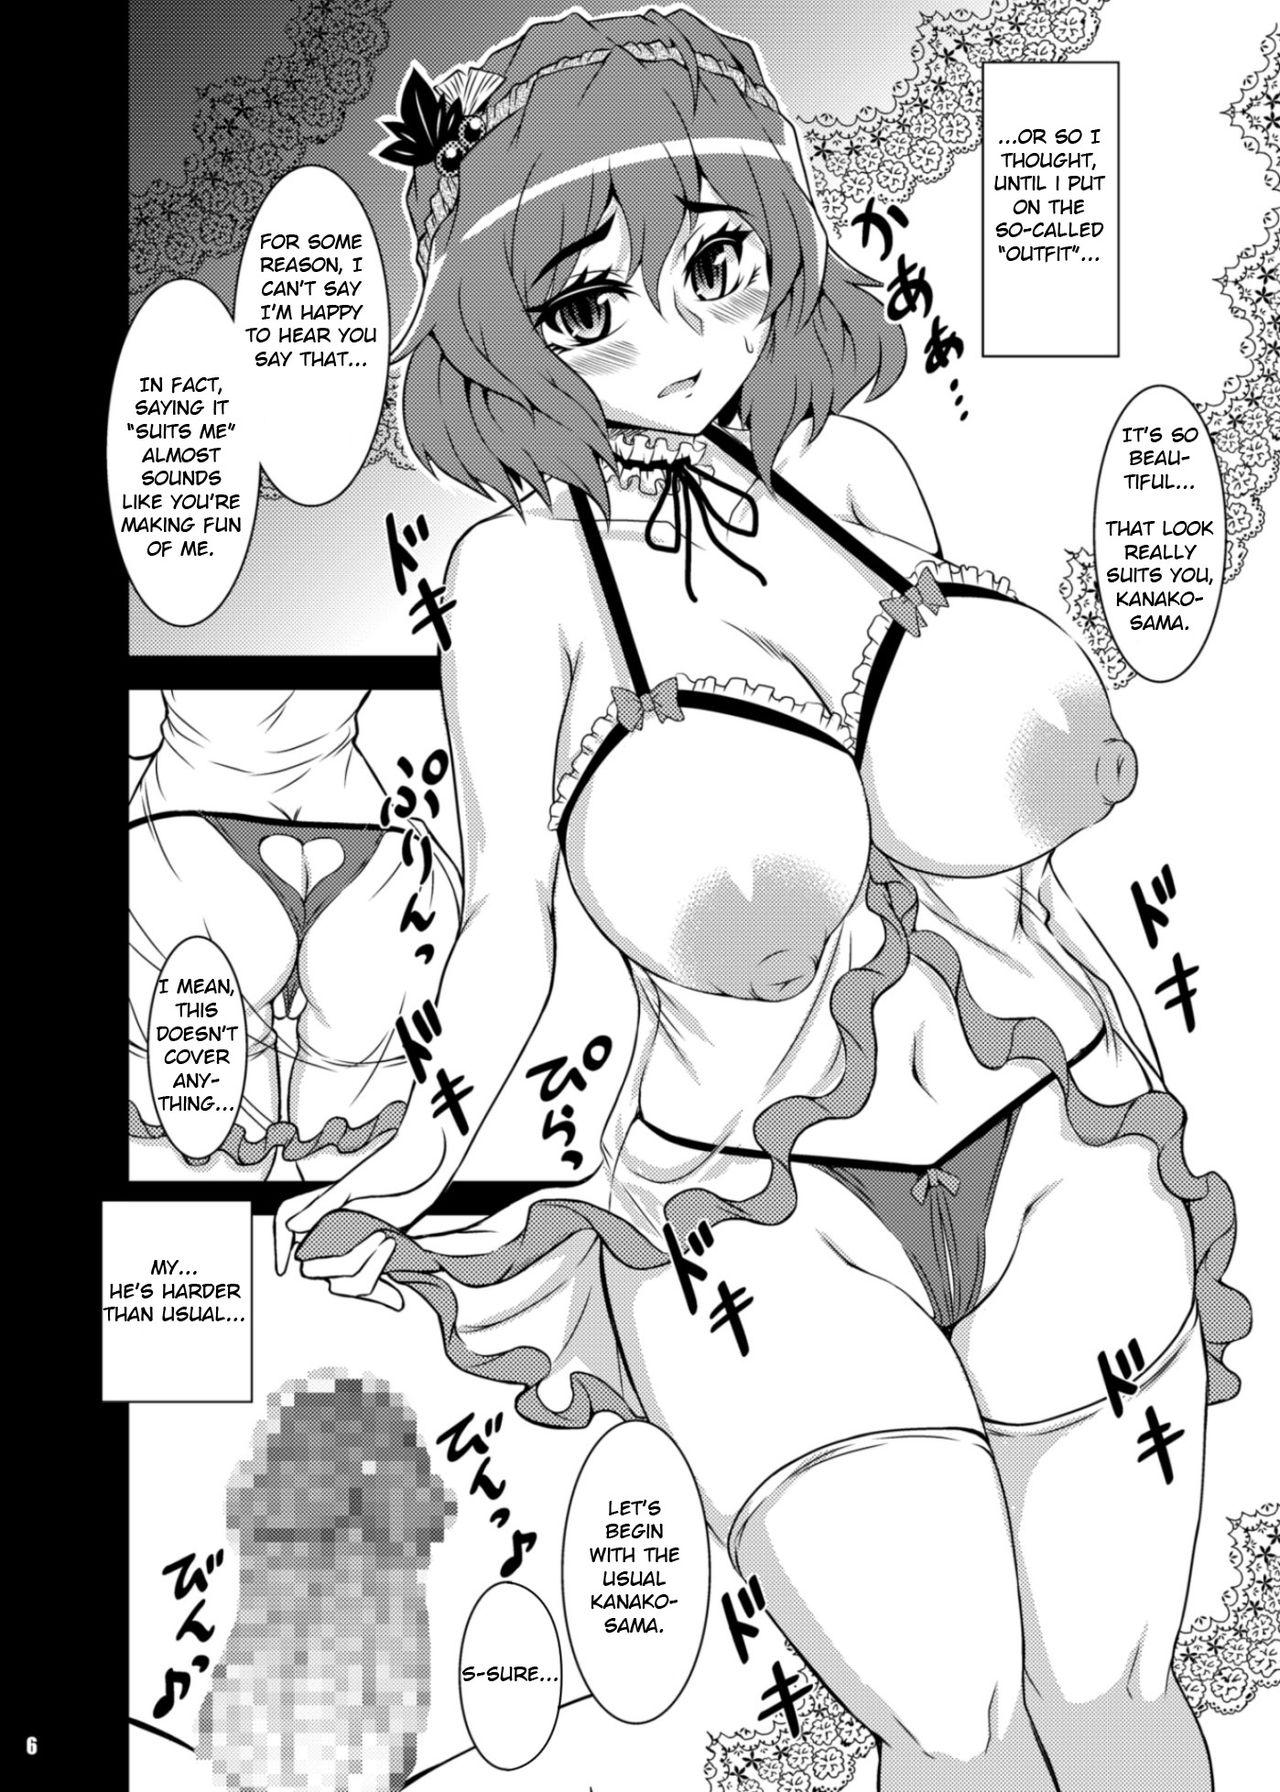 Straight Himegoto Kamisama - Touhou project Squirters - Page 6